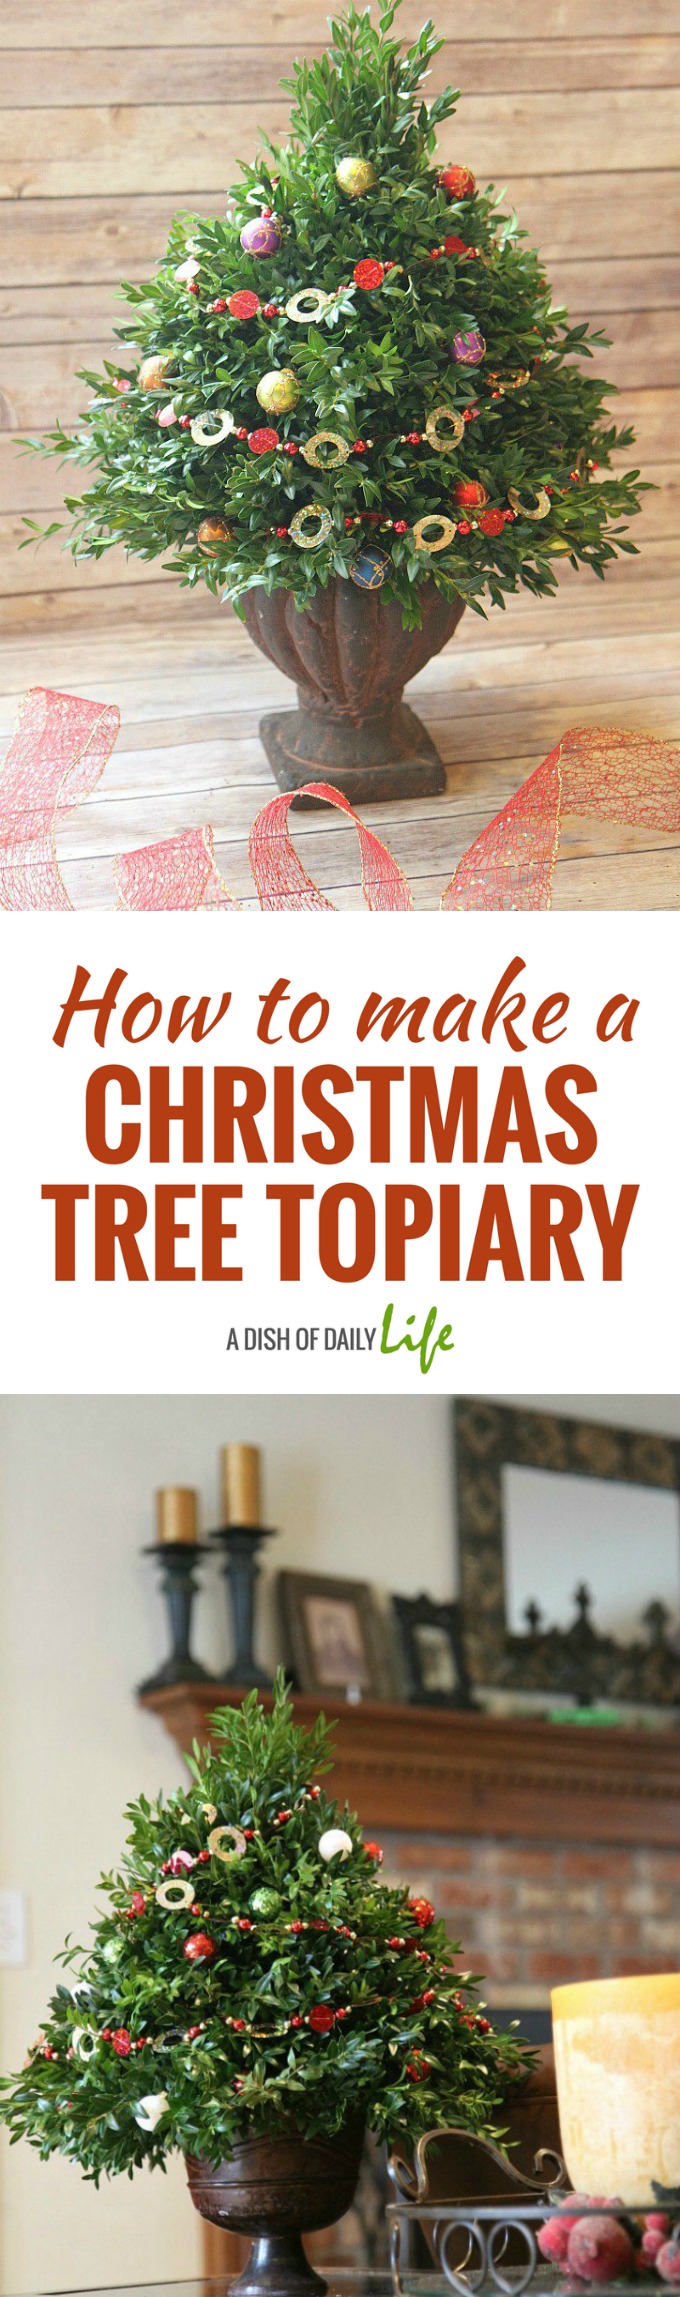 Learn how to make a Christmas tree topiary for the holidays! This DIY project is perfect for holiday decor for your home or gift giving! #holidaygift #DIY #Christmas #giftideas #homemade